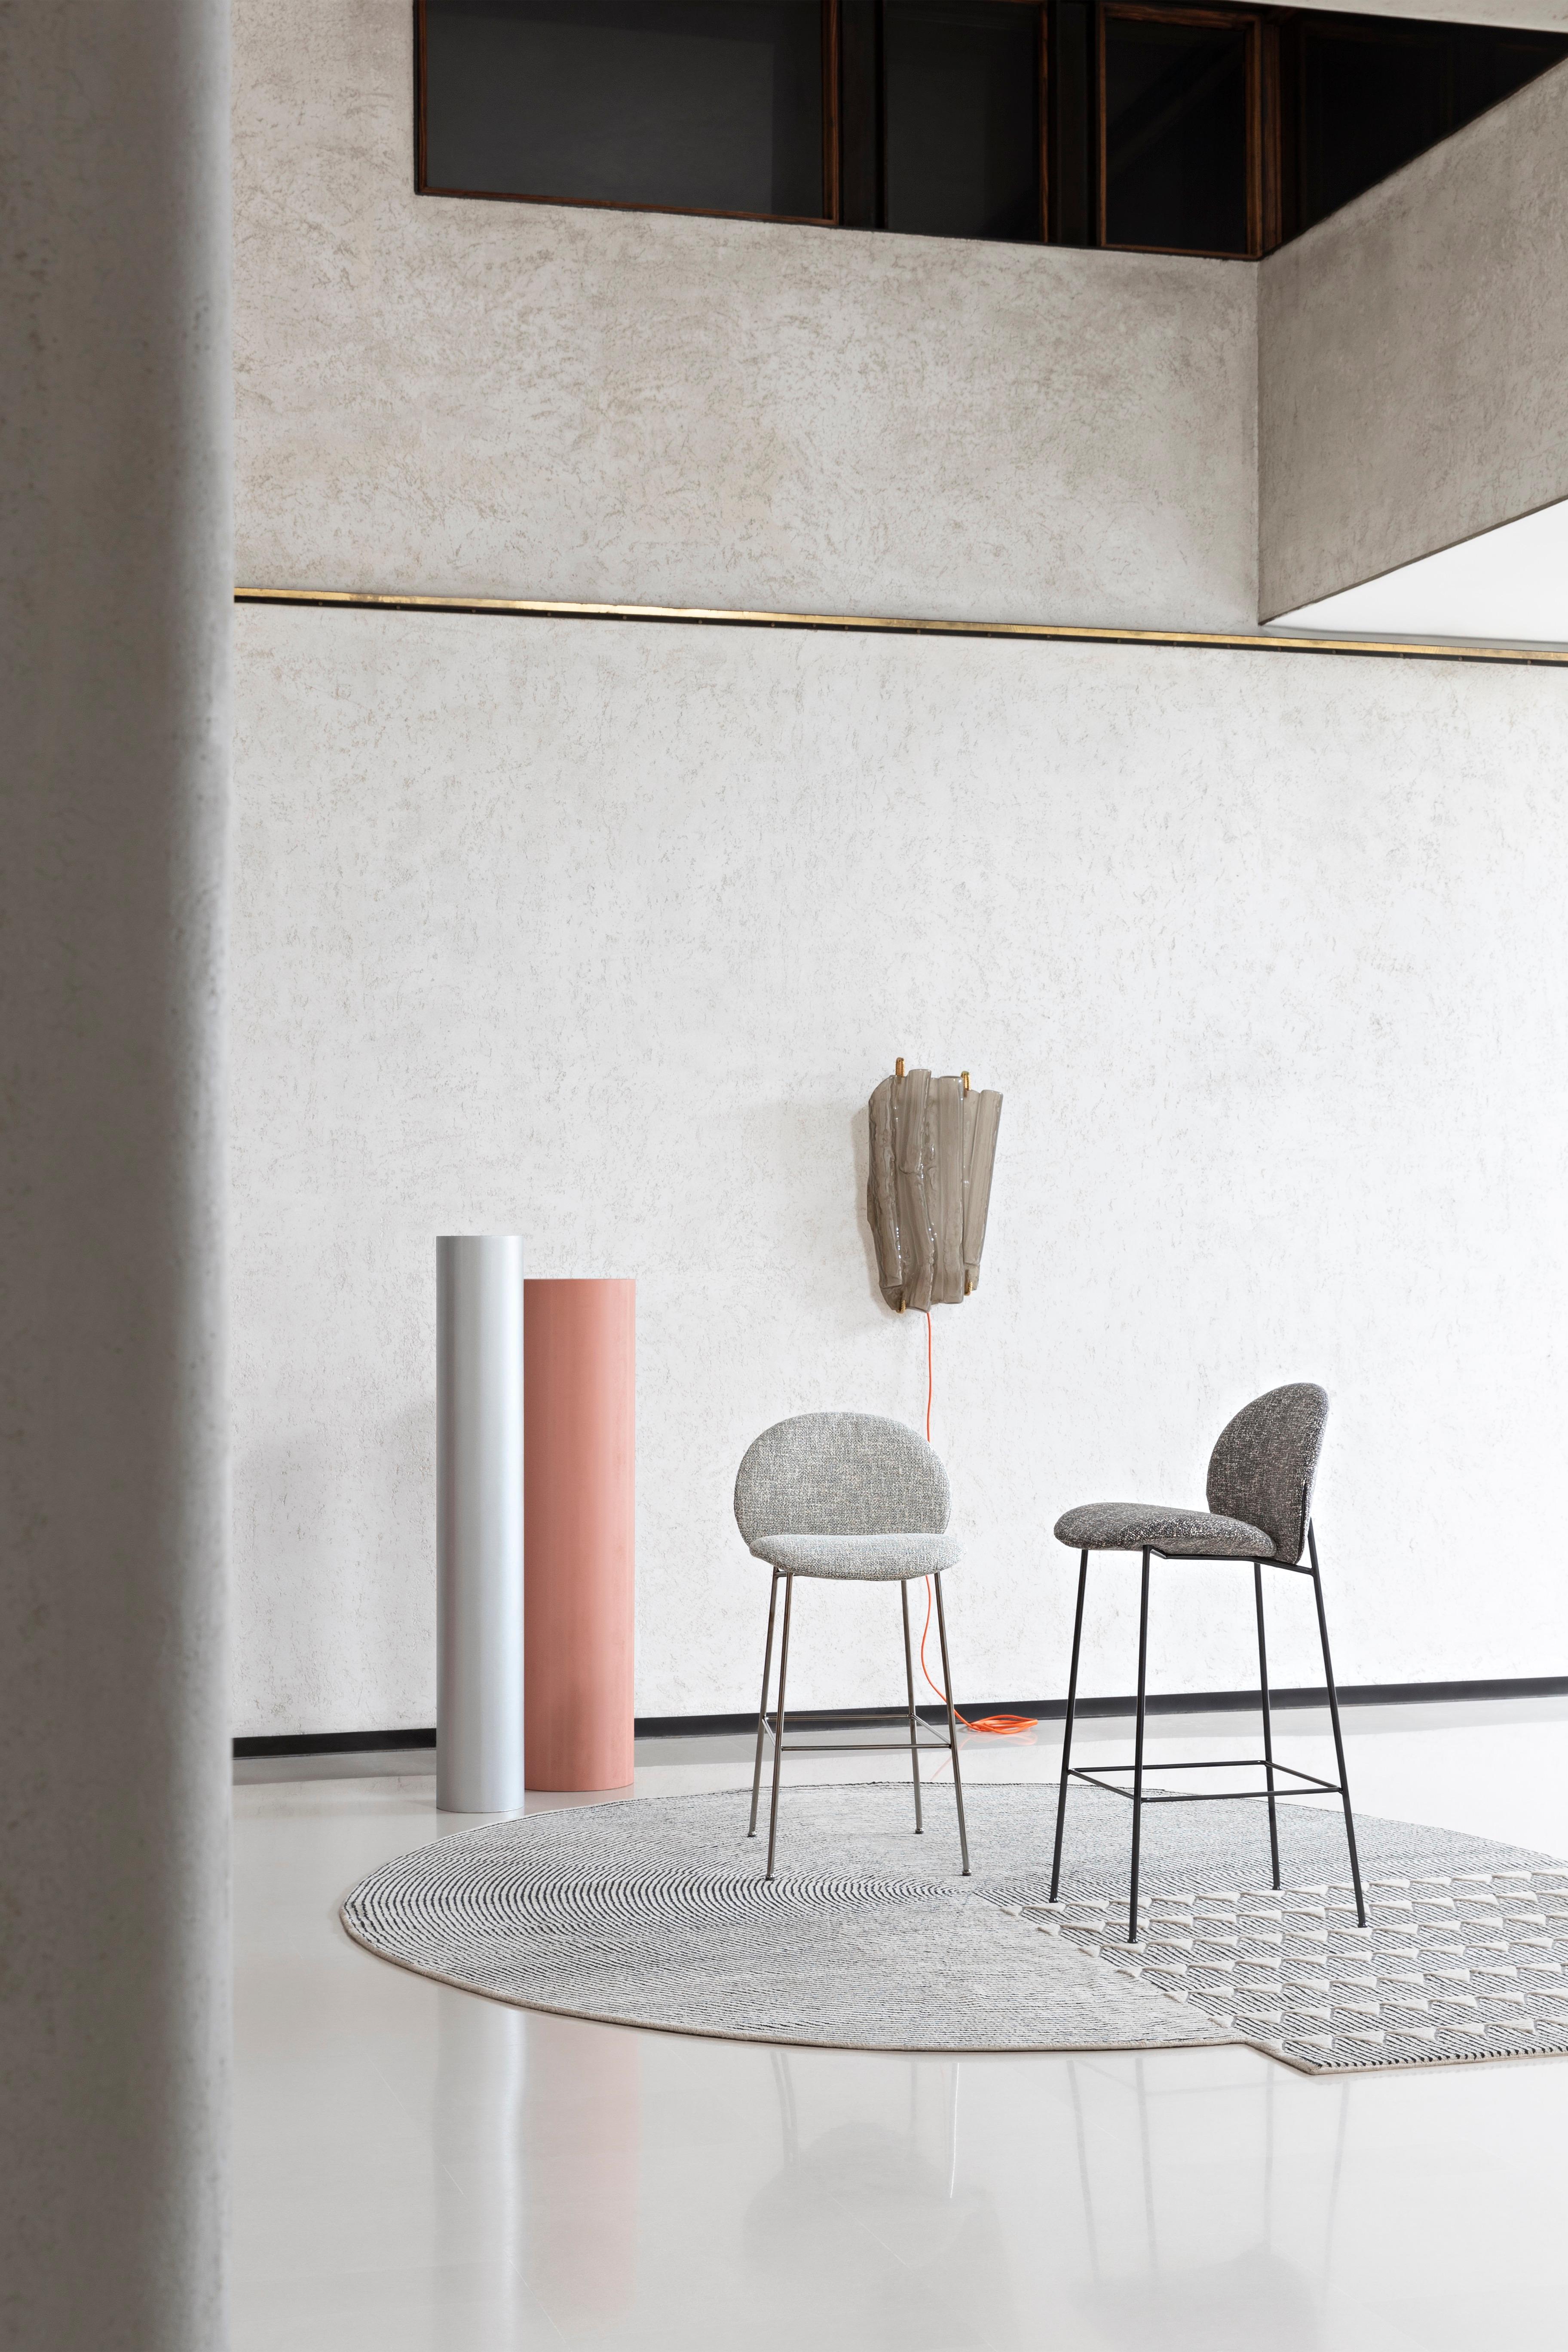 The Ola chair grows taller: it adapts the same concept of curved sheets converging towards a single central point but this time in the form of a stool. The padded and welcoming form of the Ola collection extends to a different use within the dining